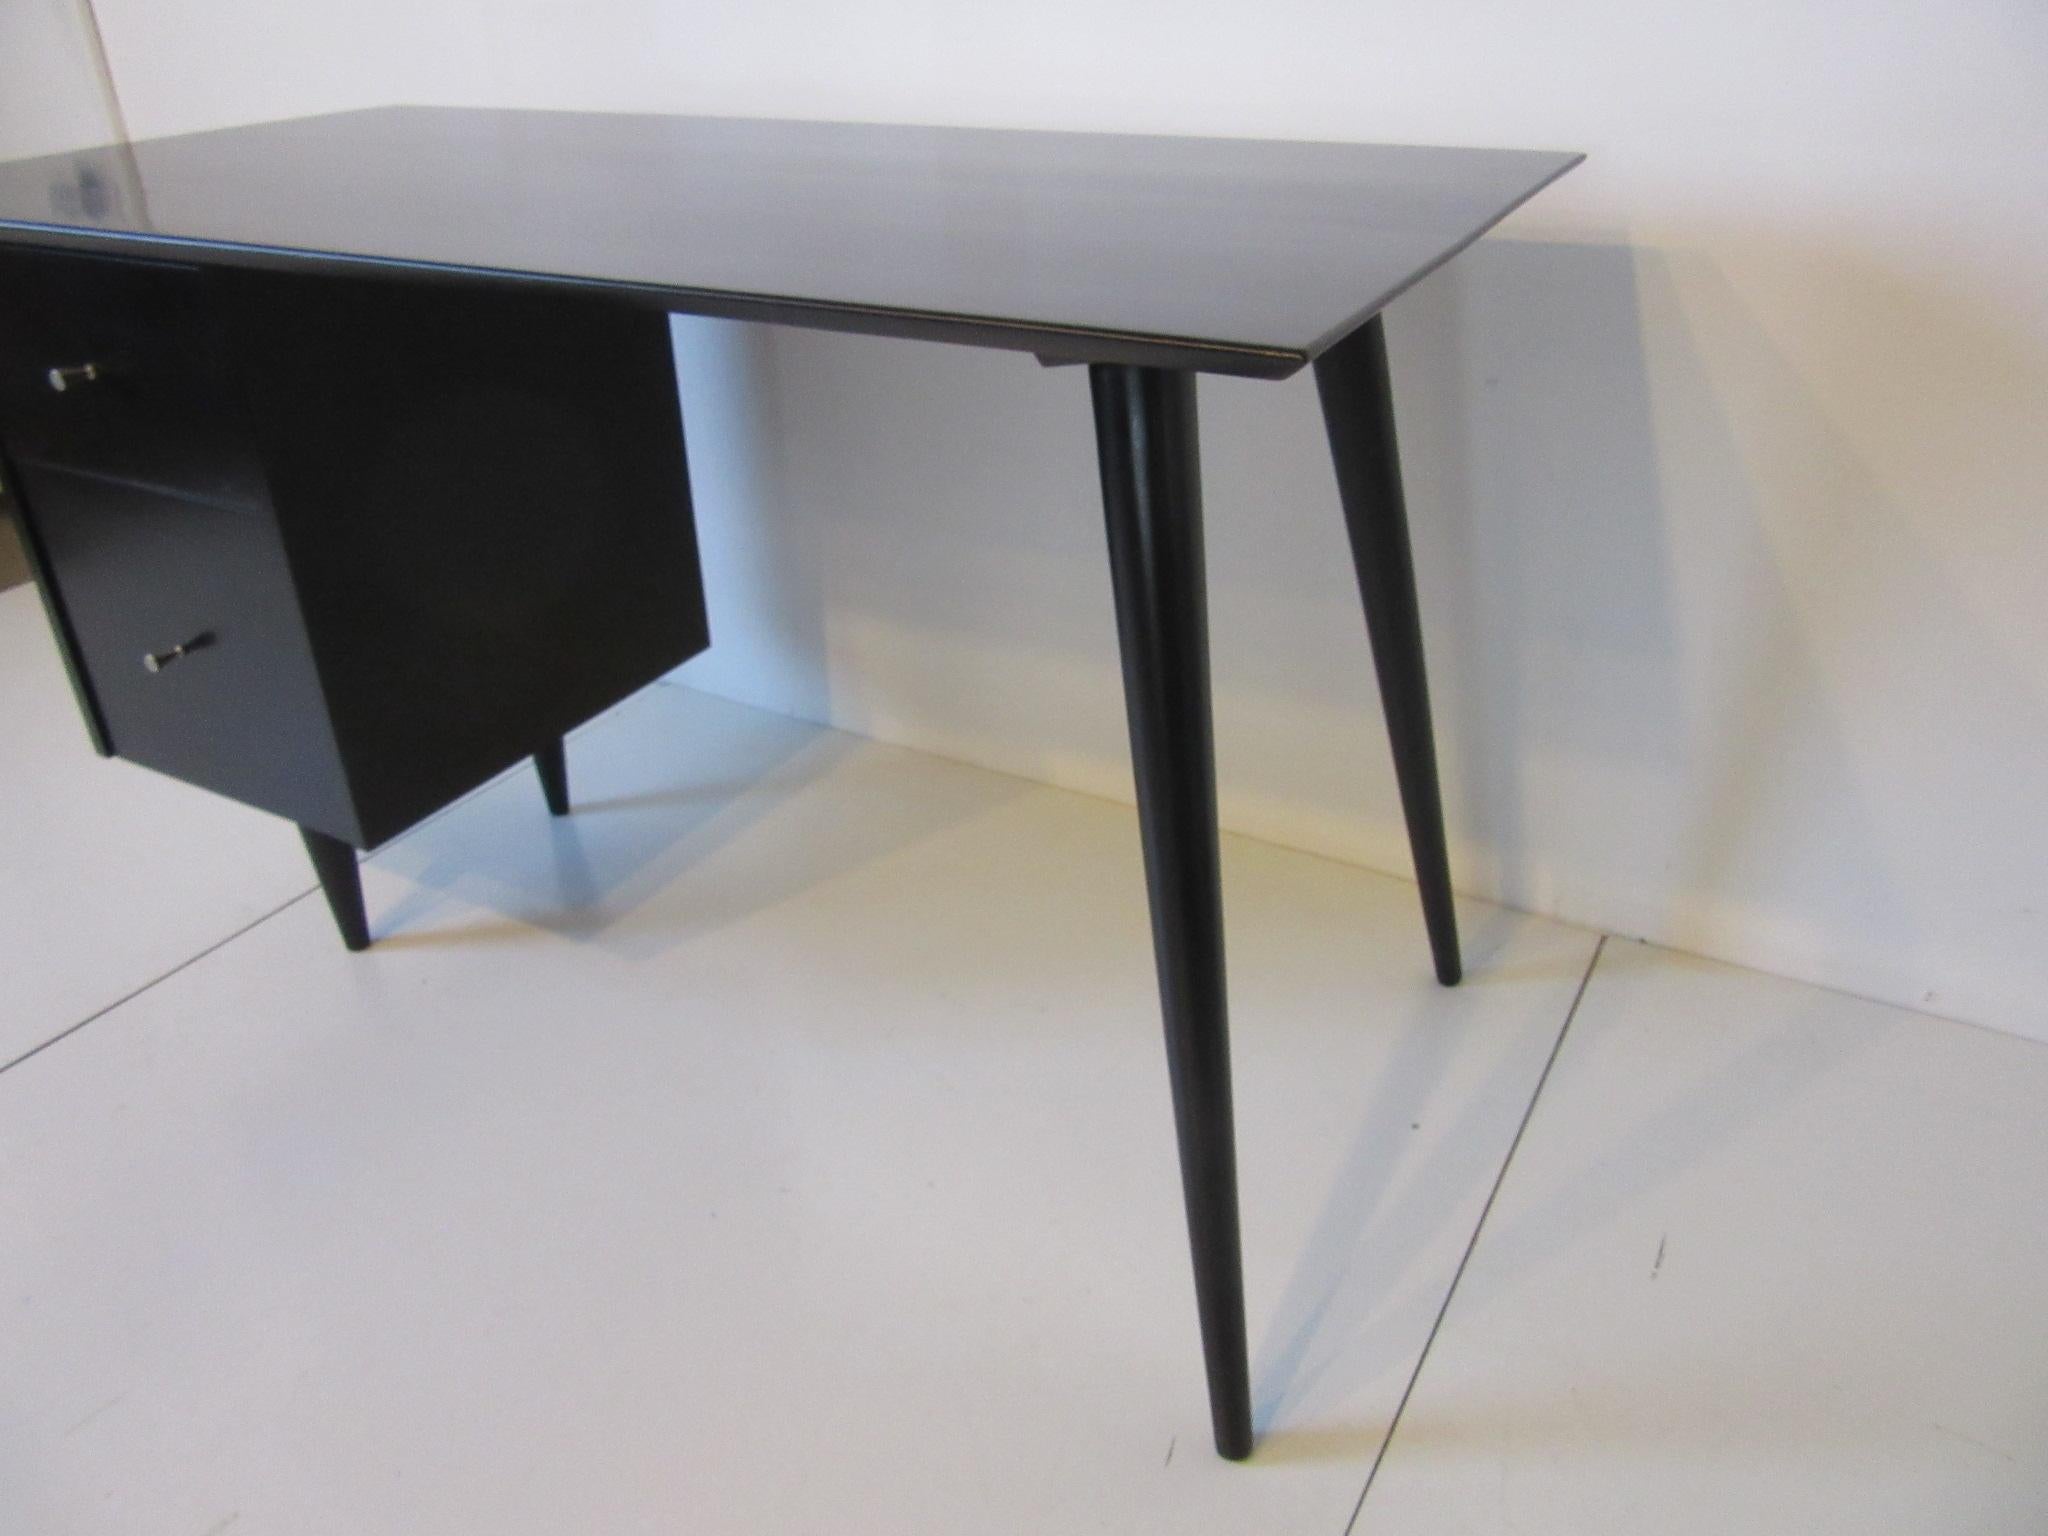 A satin black McCobb desk with splay leg design to one end and two drawers with the T pulls, from the Planner Group collection for the Winchendon Furniture Company.